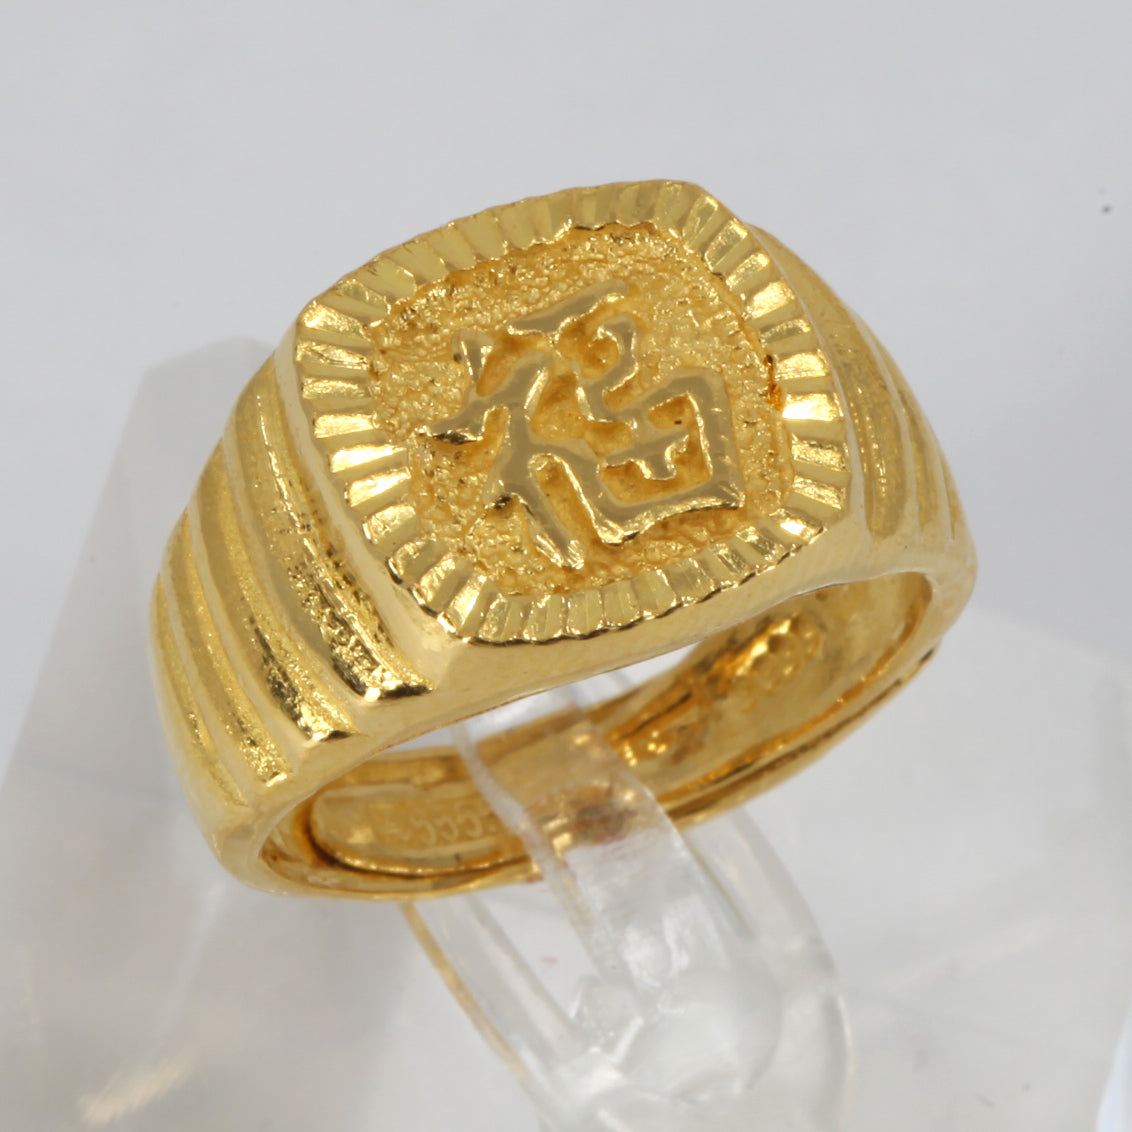 24K Solid Yellow Gold Men Blessing Adjustable Ring Band 11.5 Grams